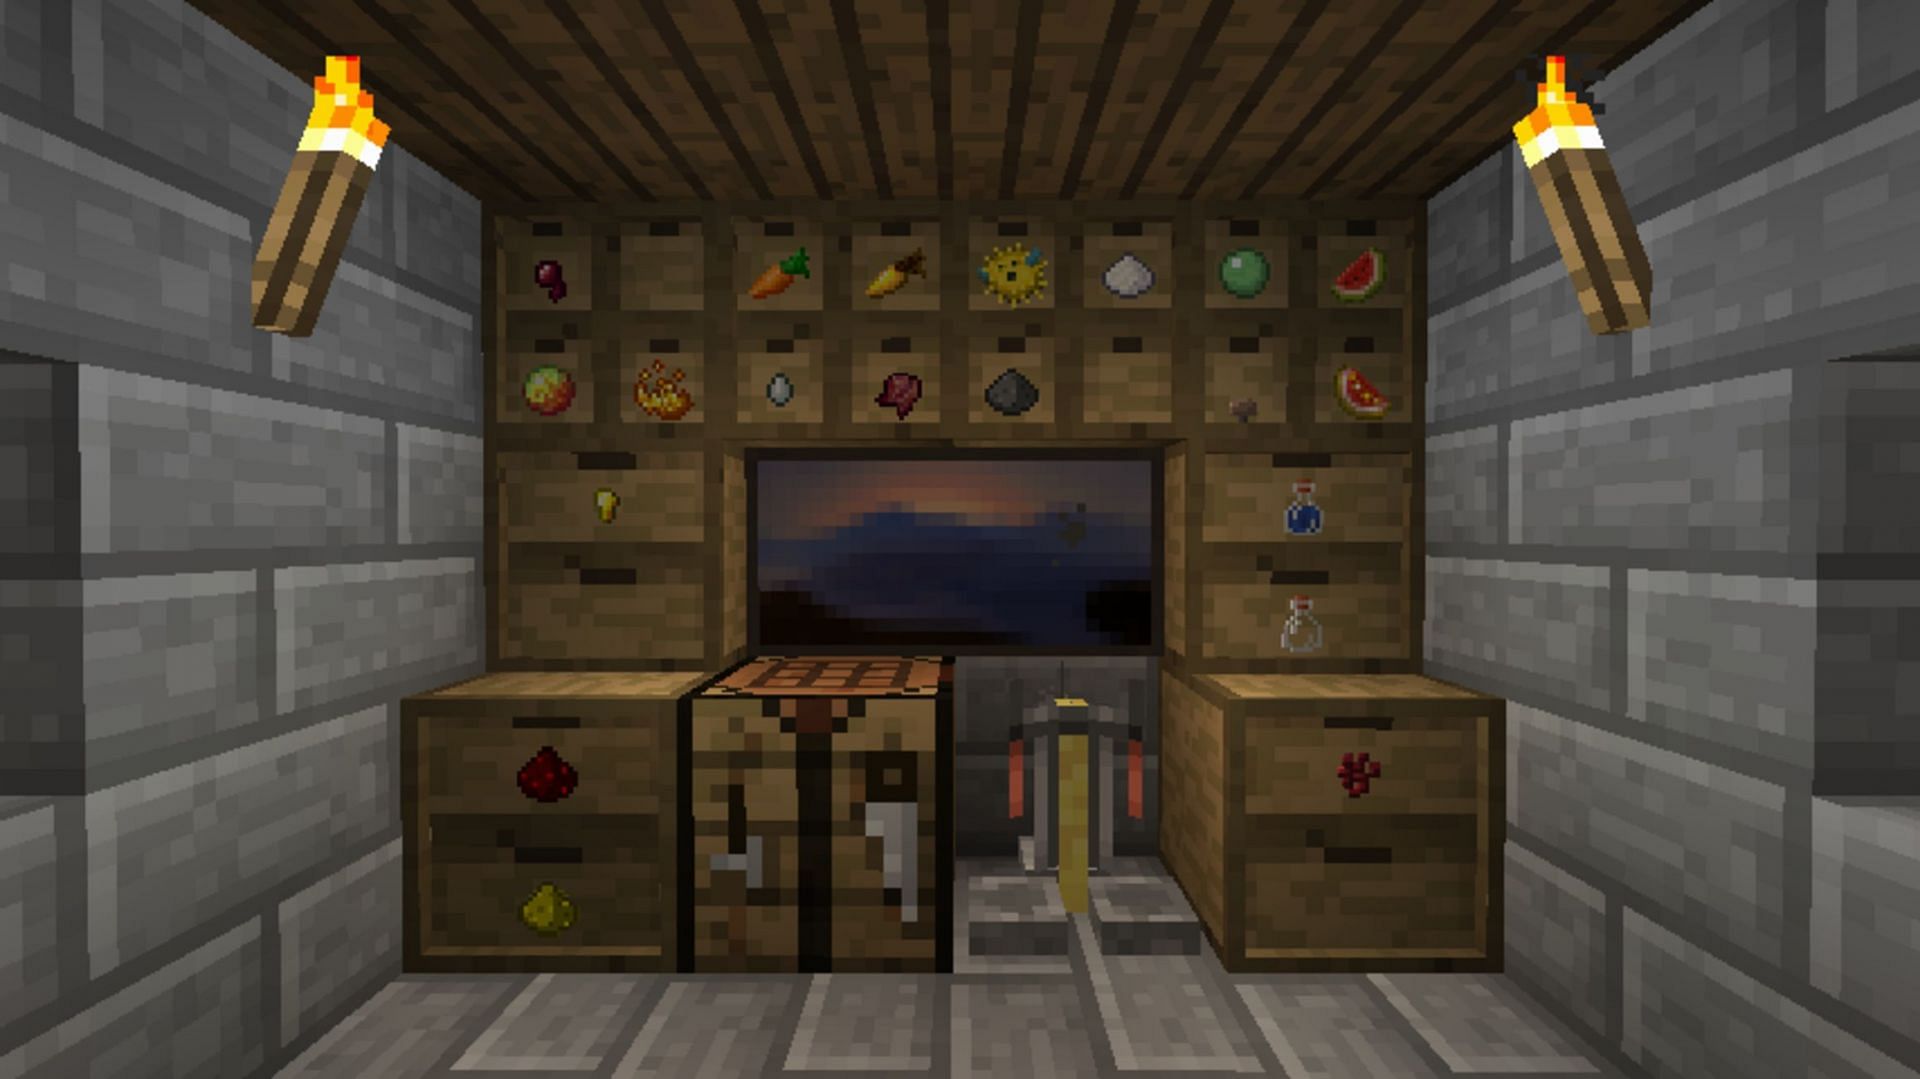 A player&#039;s potion brewing station complete with storage drawers (Image via Texelsaur/CurseForge)